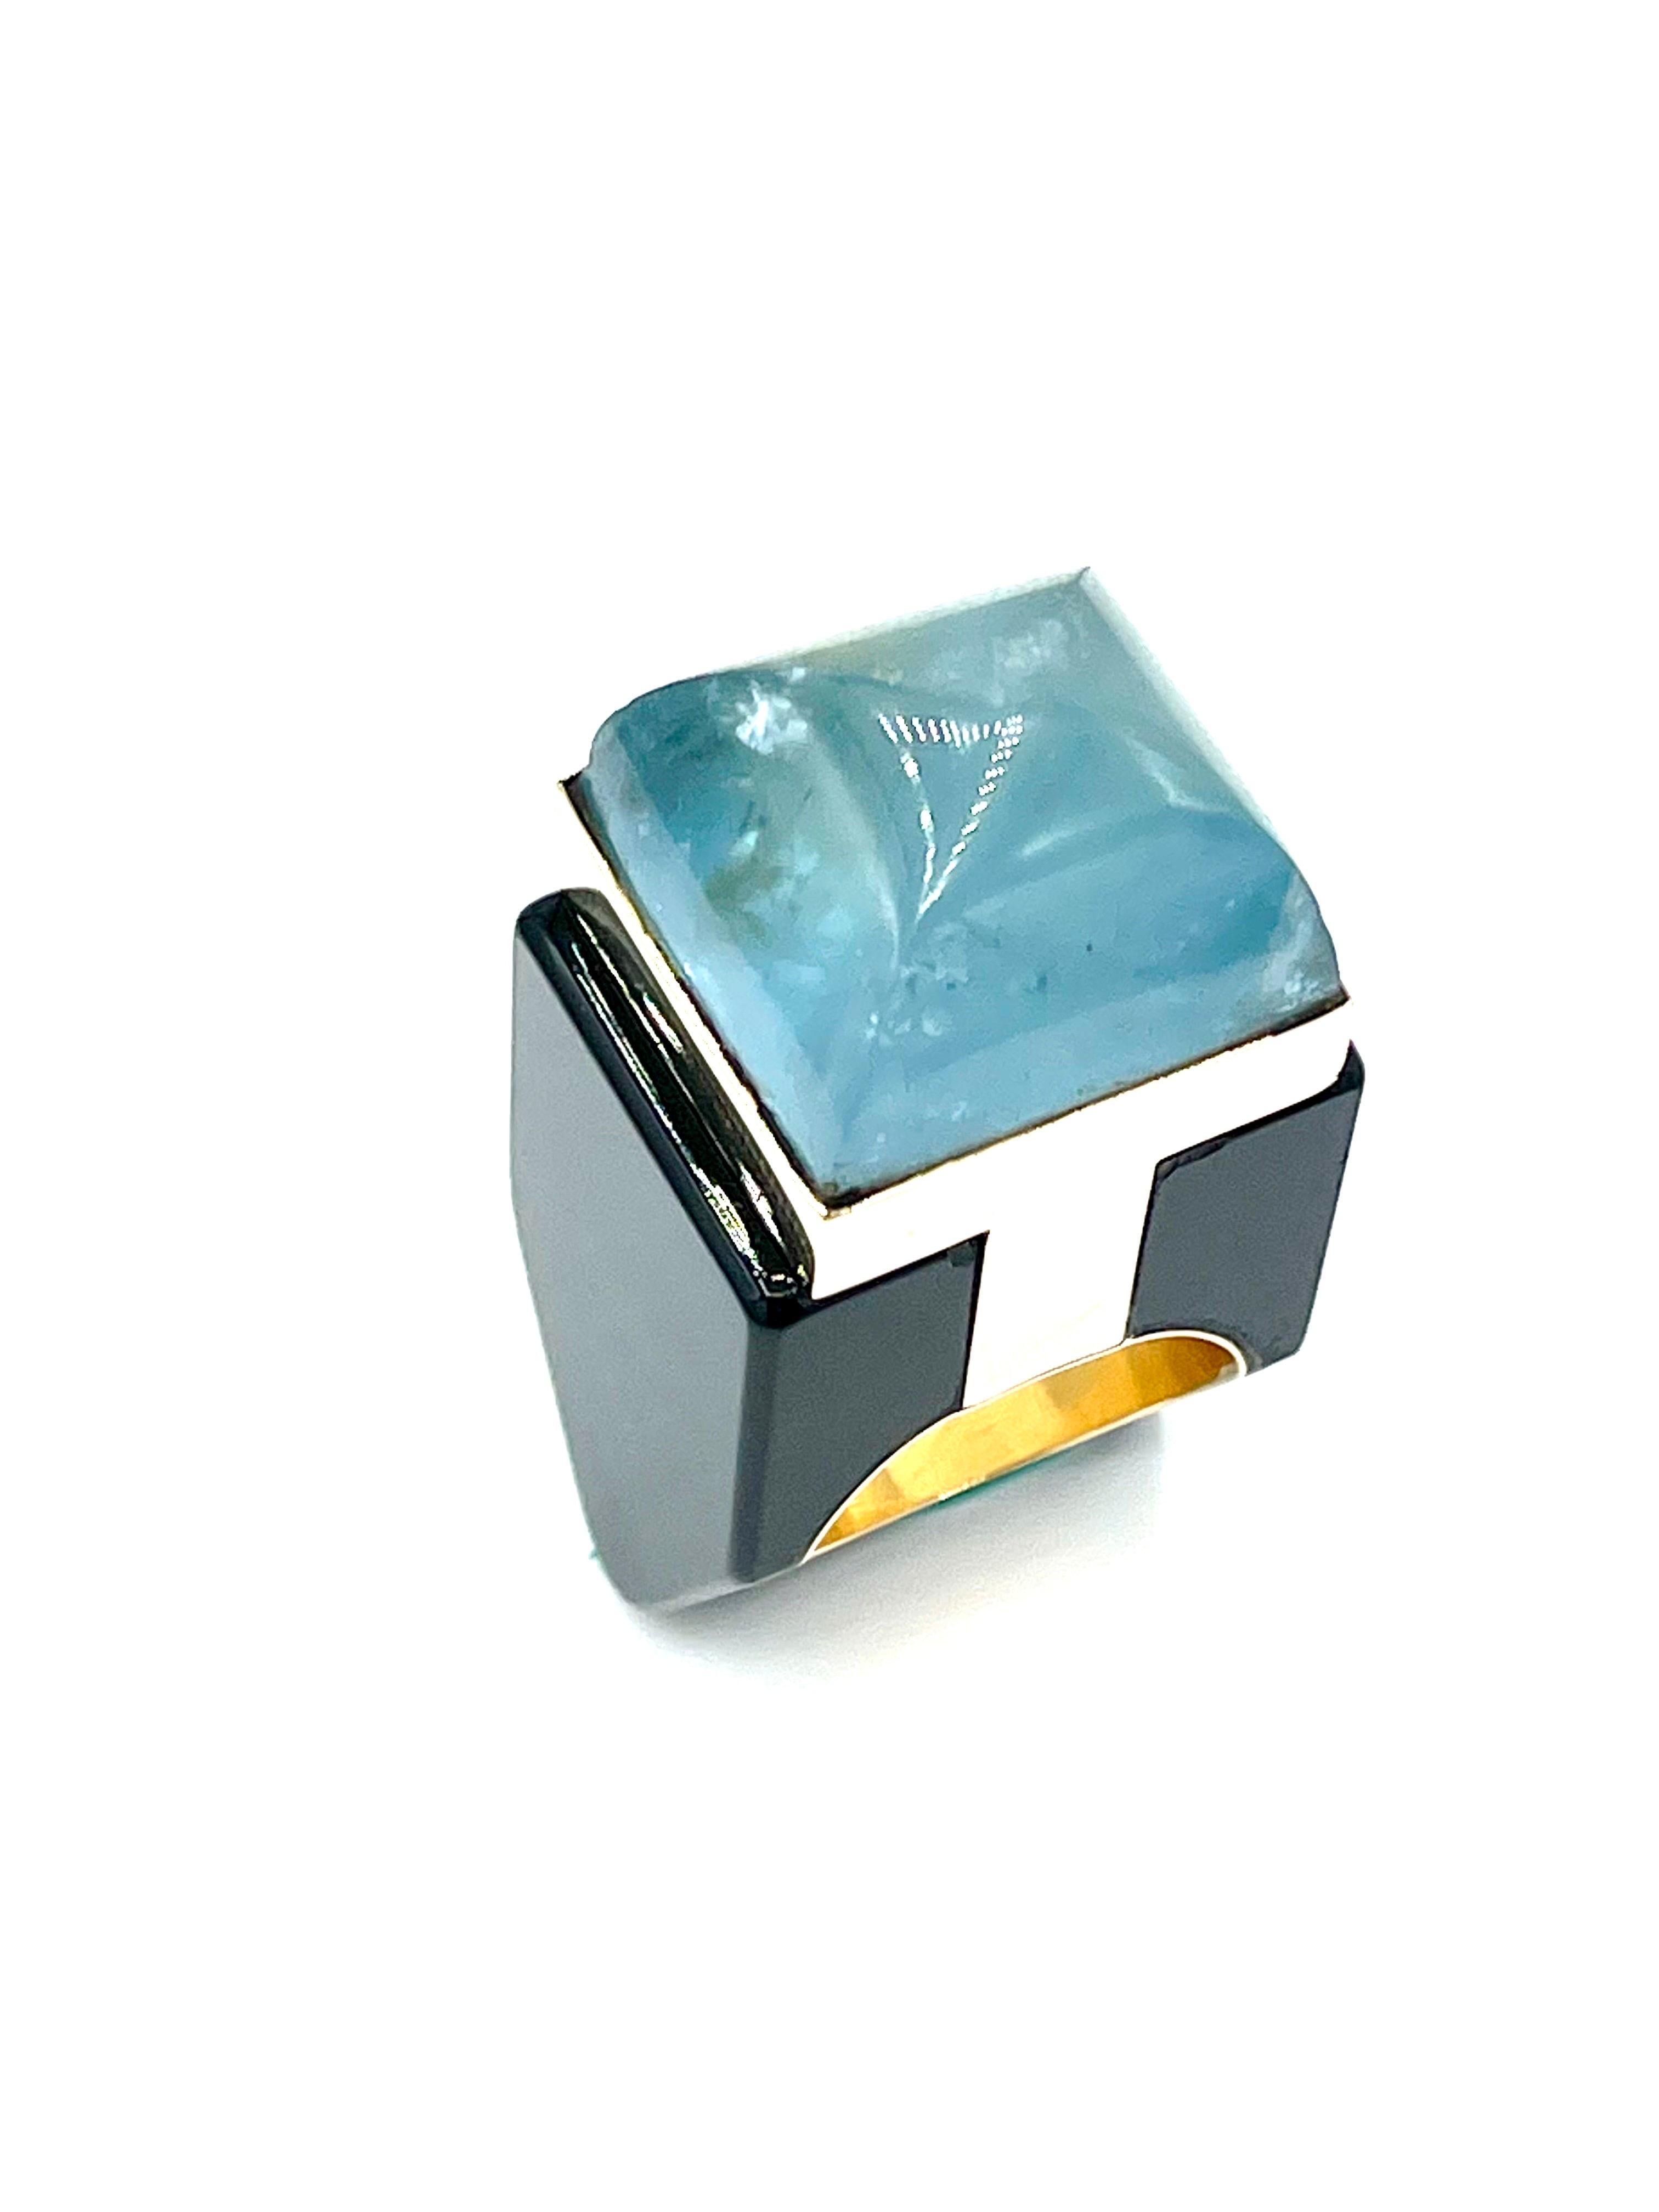 A fun and eye catching cocktail ring!  The cabochon Aquamarine is bezel set atop a wide shank made from black Onyx and 18K yellow gold.  The ring is two inches from top to bottom.  It is currently a size 7.00 and can not be adjusted.  Offered by